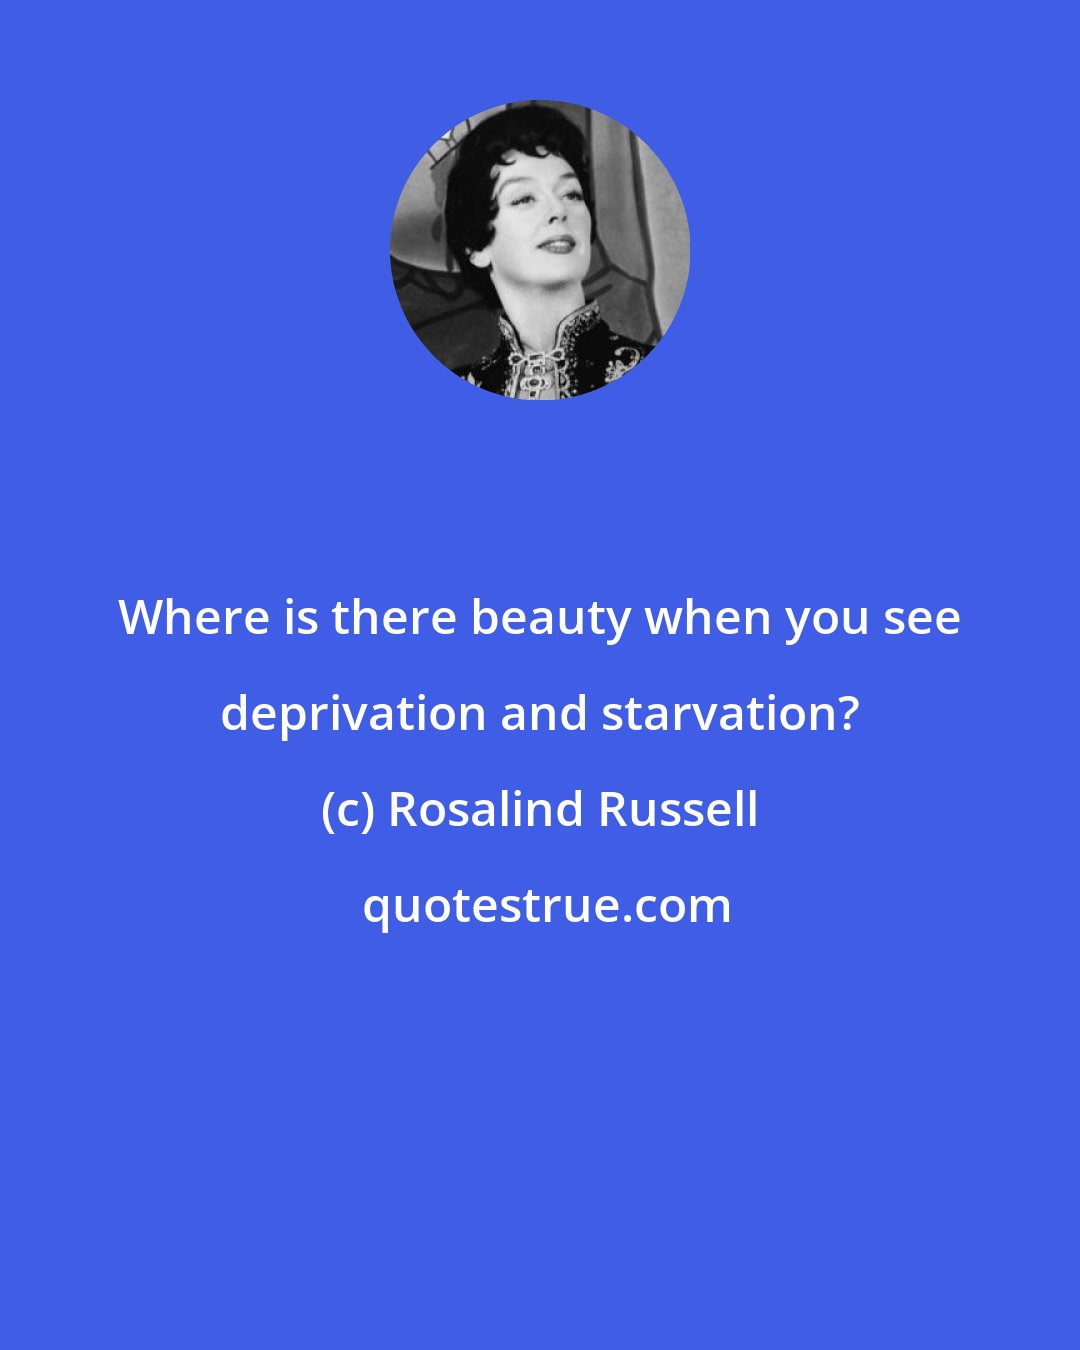 Rosalind Russell: Where is there beauty when you see deprivation and starvation?